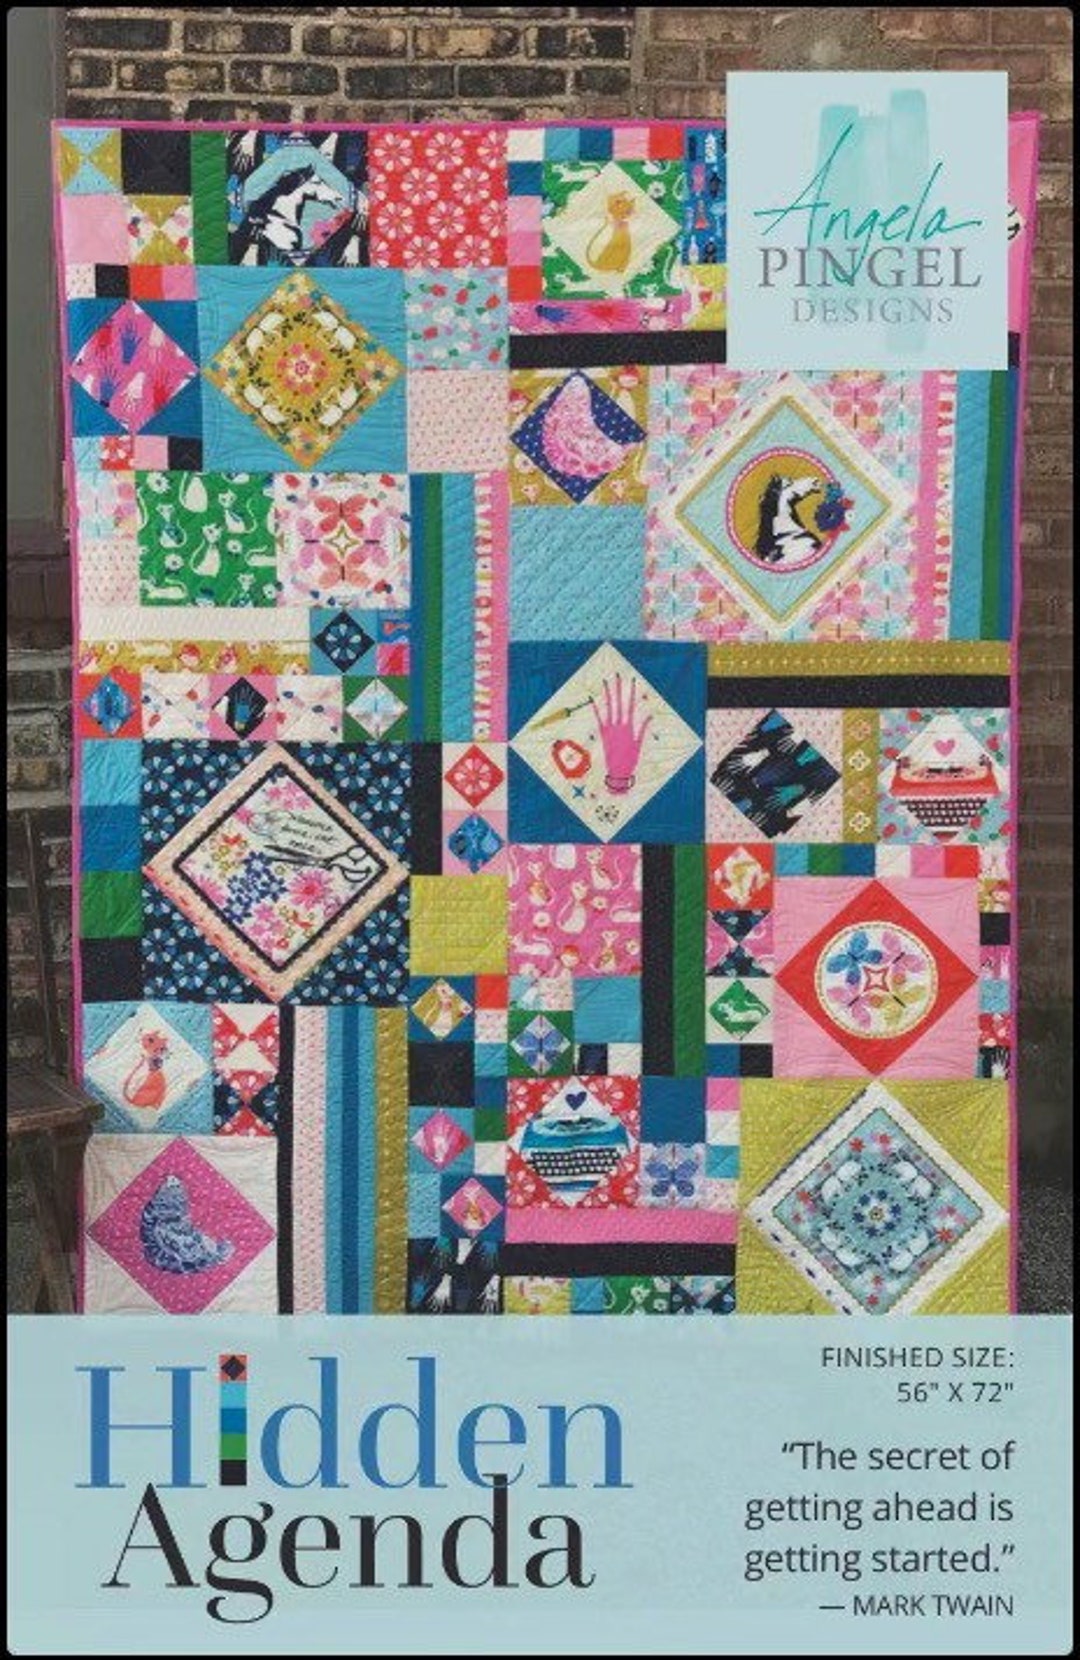 Travel Laundry Bag Pattern by Angela Pingel- Quilt in a Day Patterns